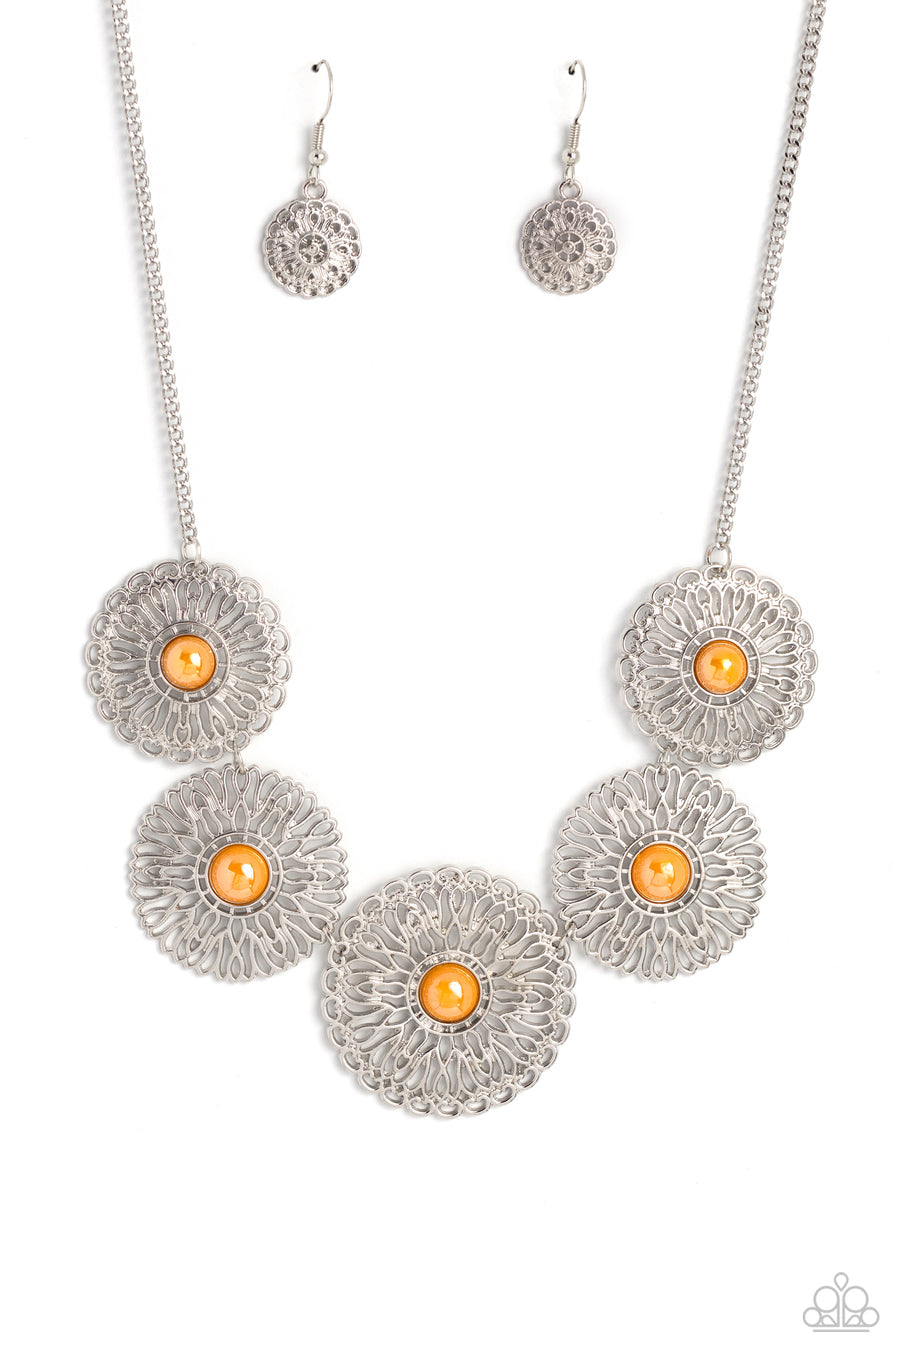 Chrysanthemum Craze - Orange and Silver Necklace - Paparazzi Accessories - Infused with a whimsical layered motif, tactile silver petals bloom from glassy orange dotted centers below the collar for an eye-catching statement.